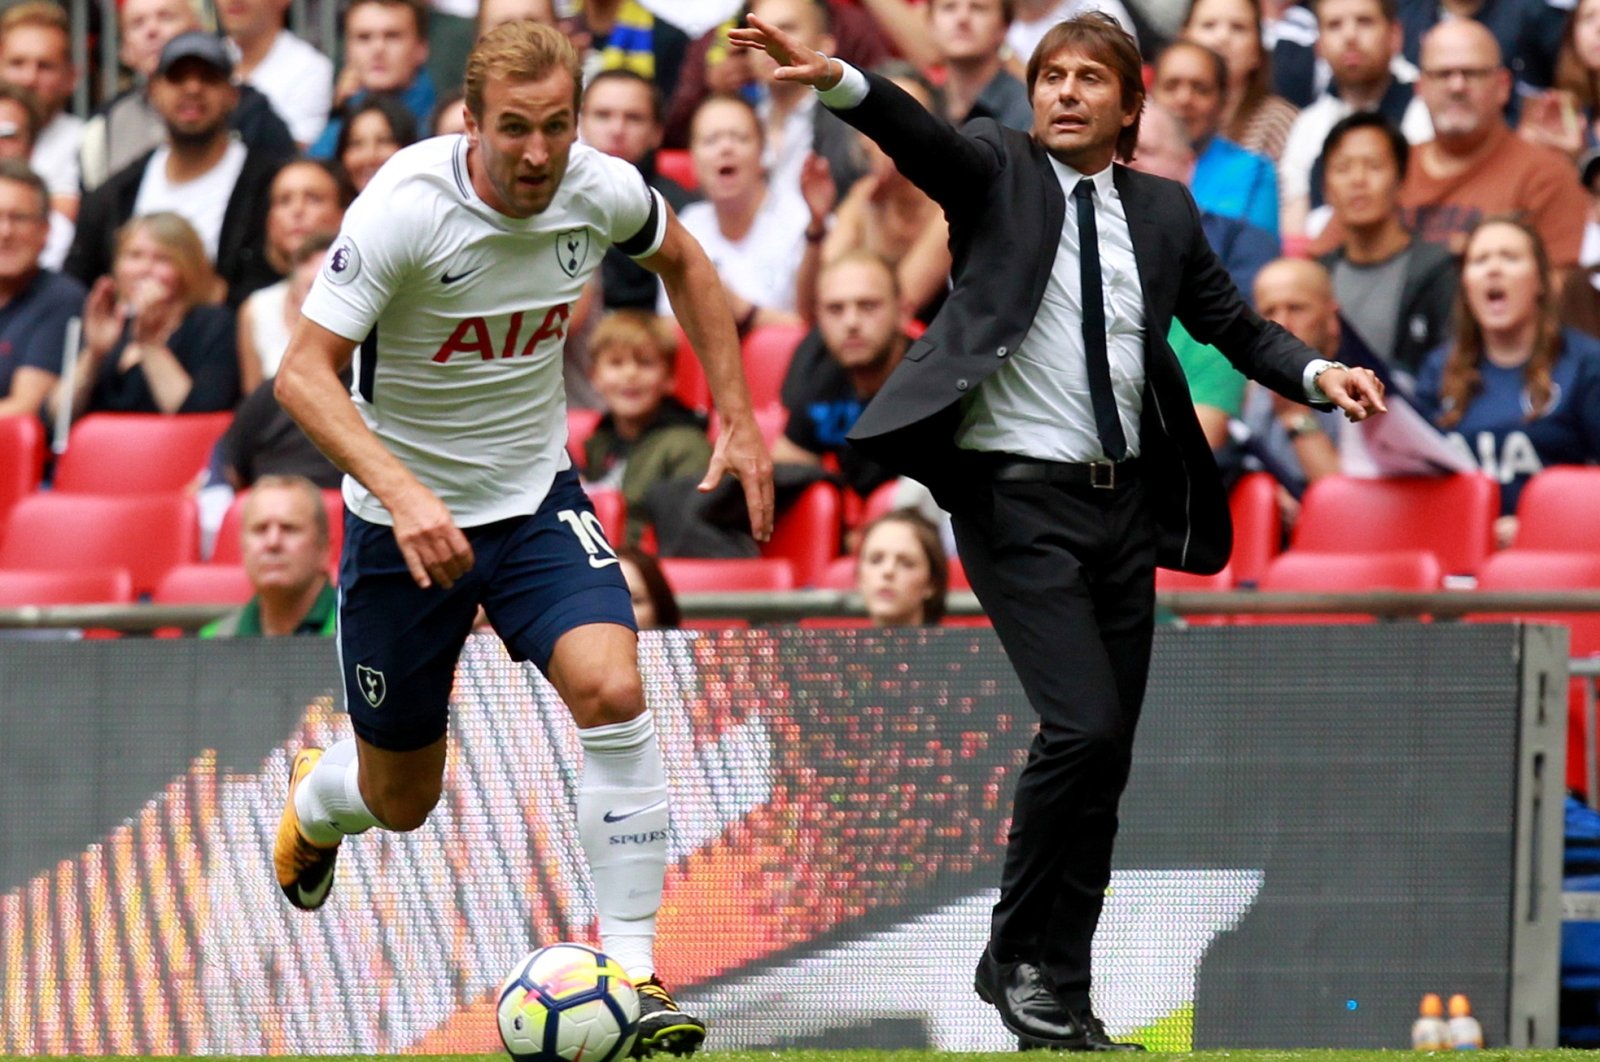 Tottenham Hotspur's Harry Kane (L) in action next to then-Chelsea manager Antonio Conte (R) during a Premier League match in London, England, Aug. 20, 2017. (EPA Photo)